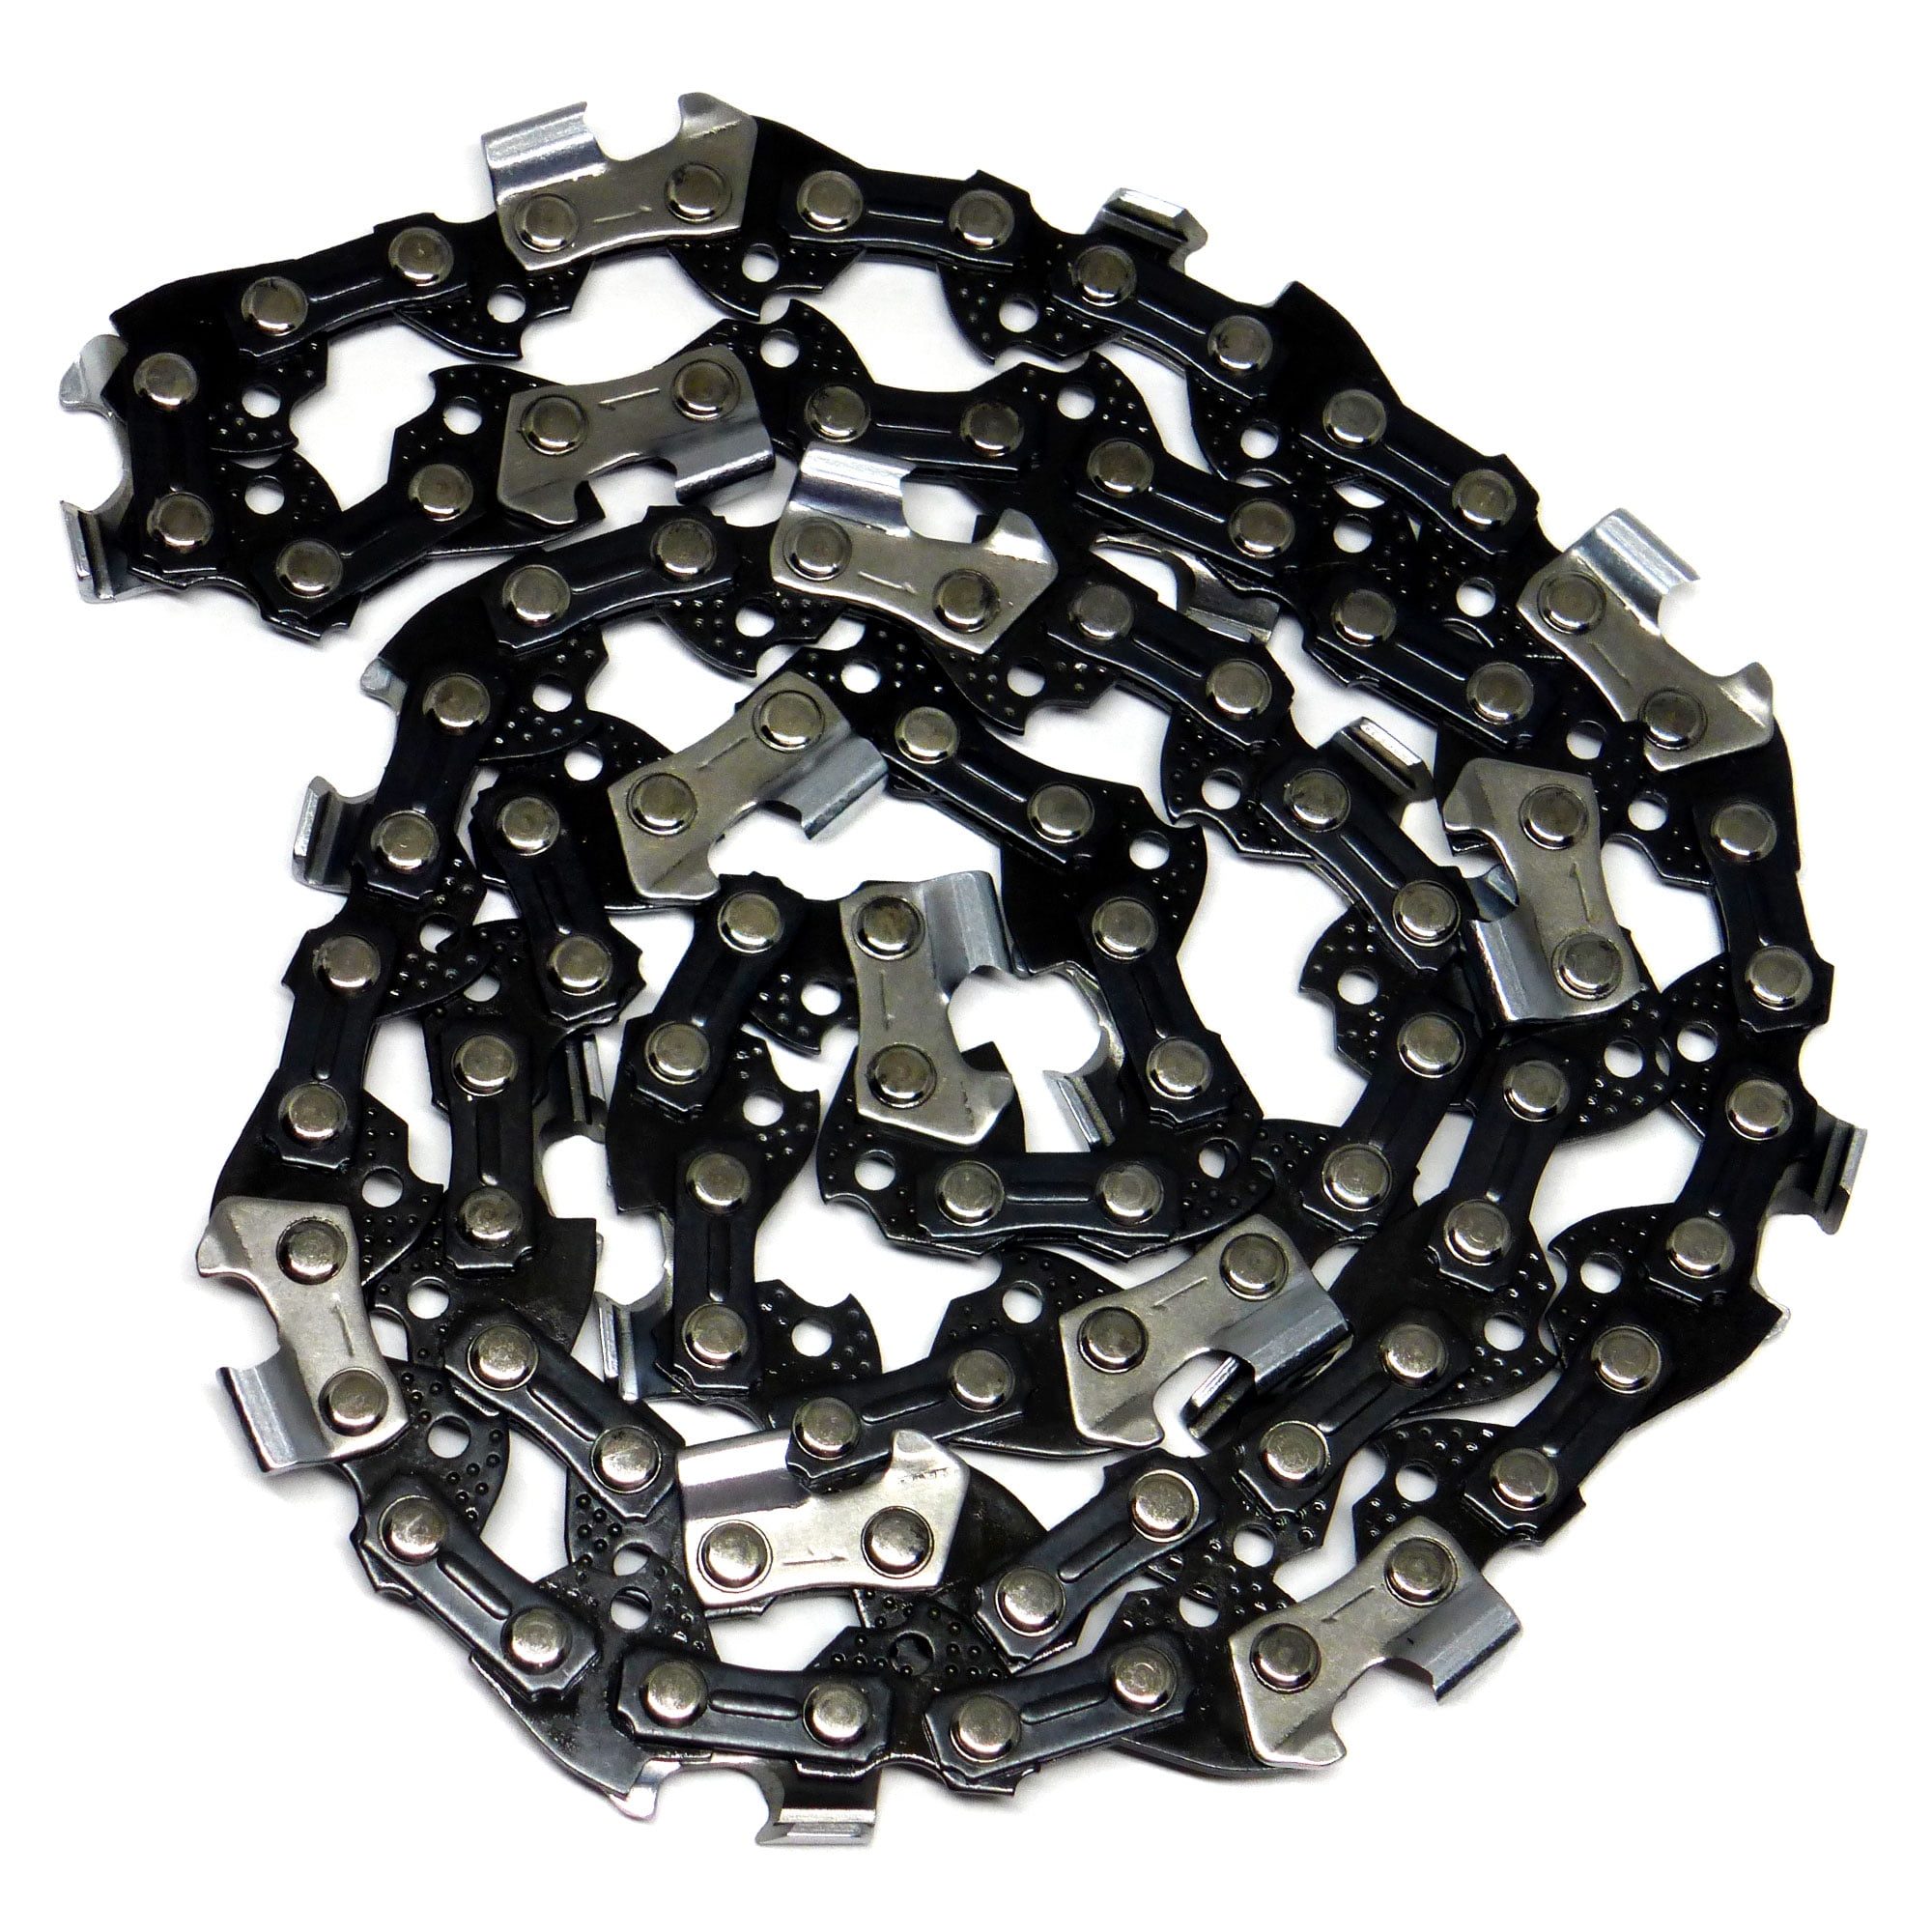 Details about   2-PACK 12" MCCULLOCH Chainsaw Chain Blade 45DL 3/8LP 050 **FITS OVER 30 MODELS** 